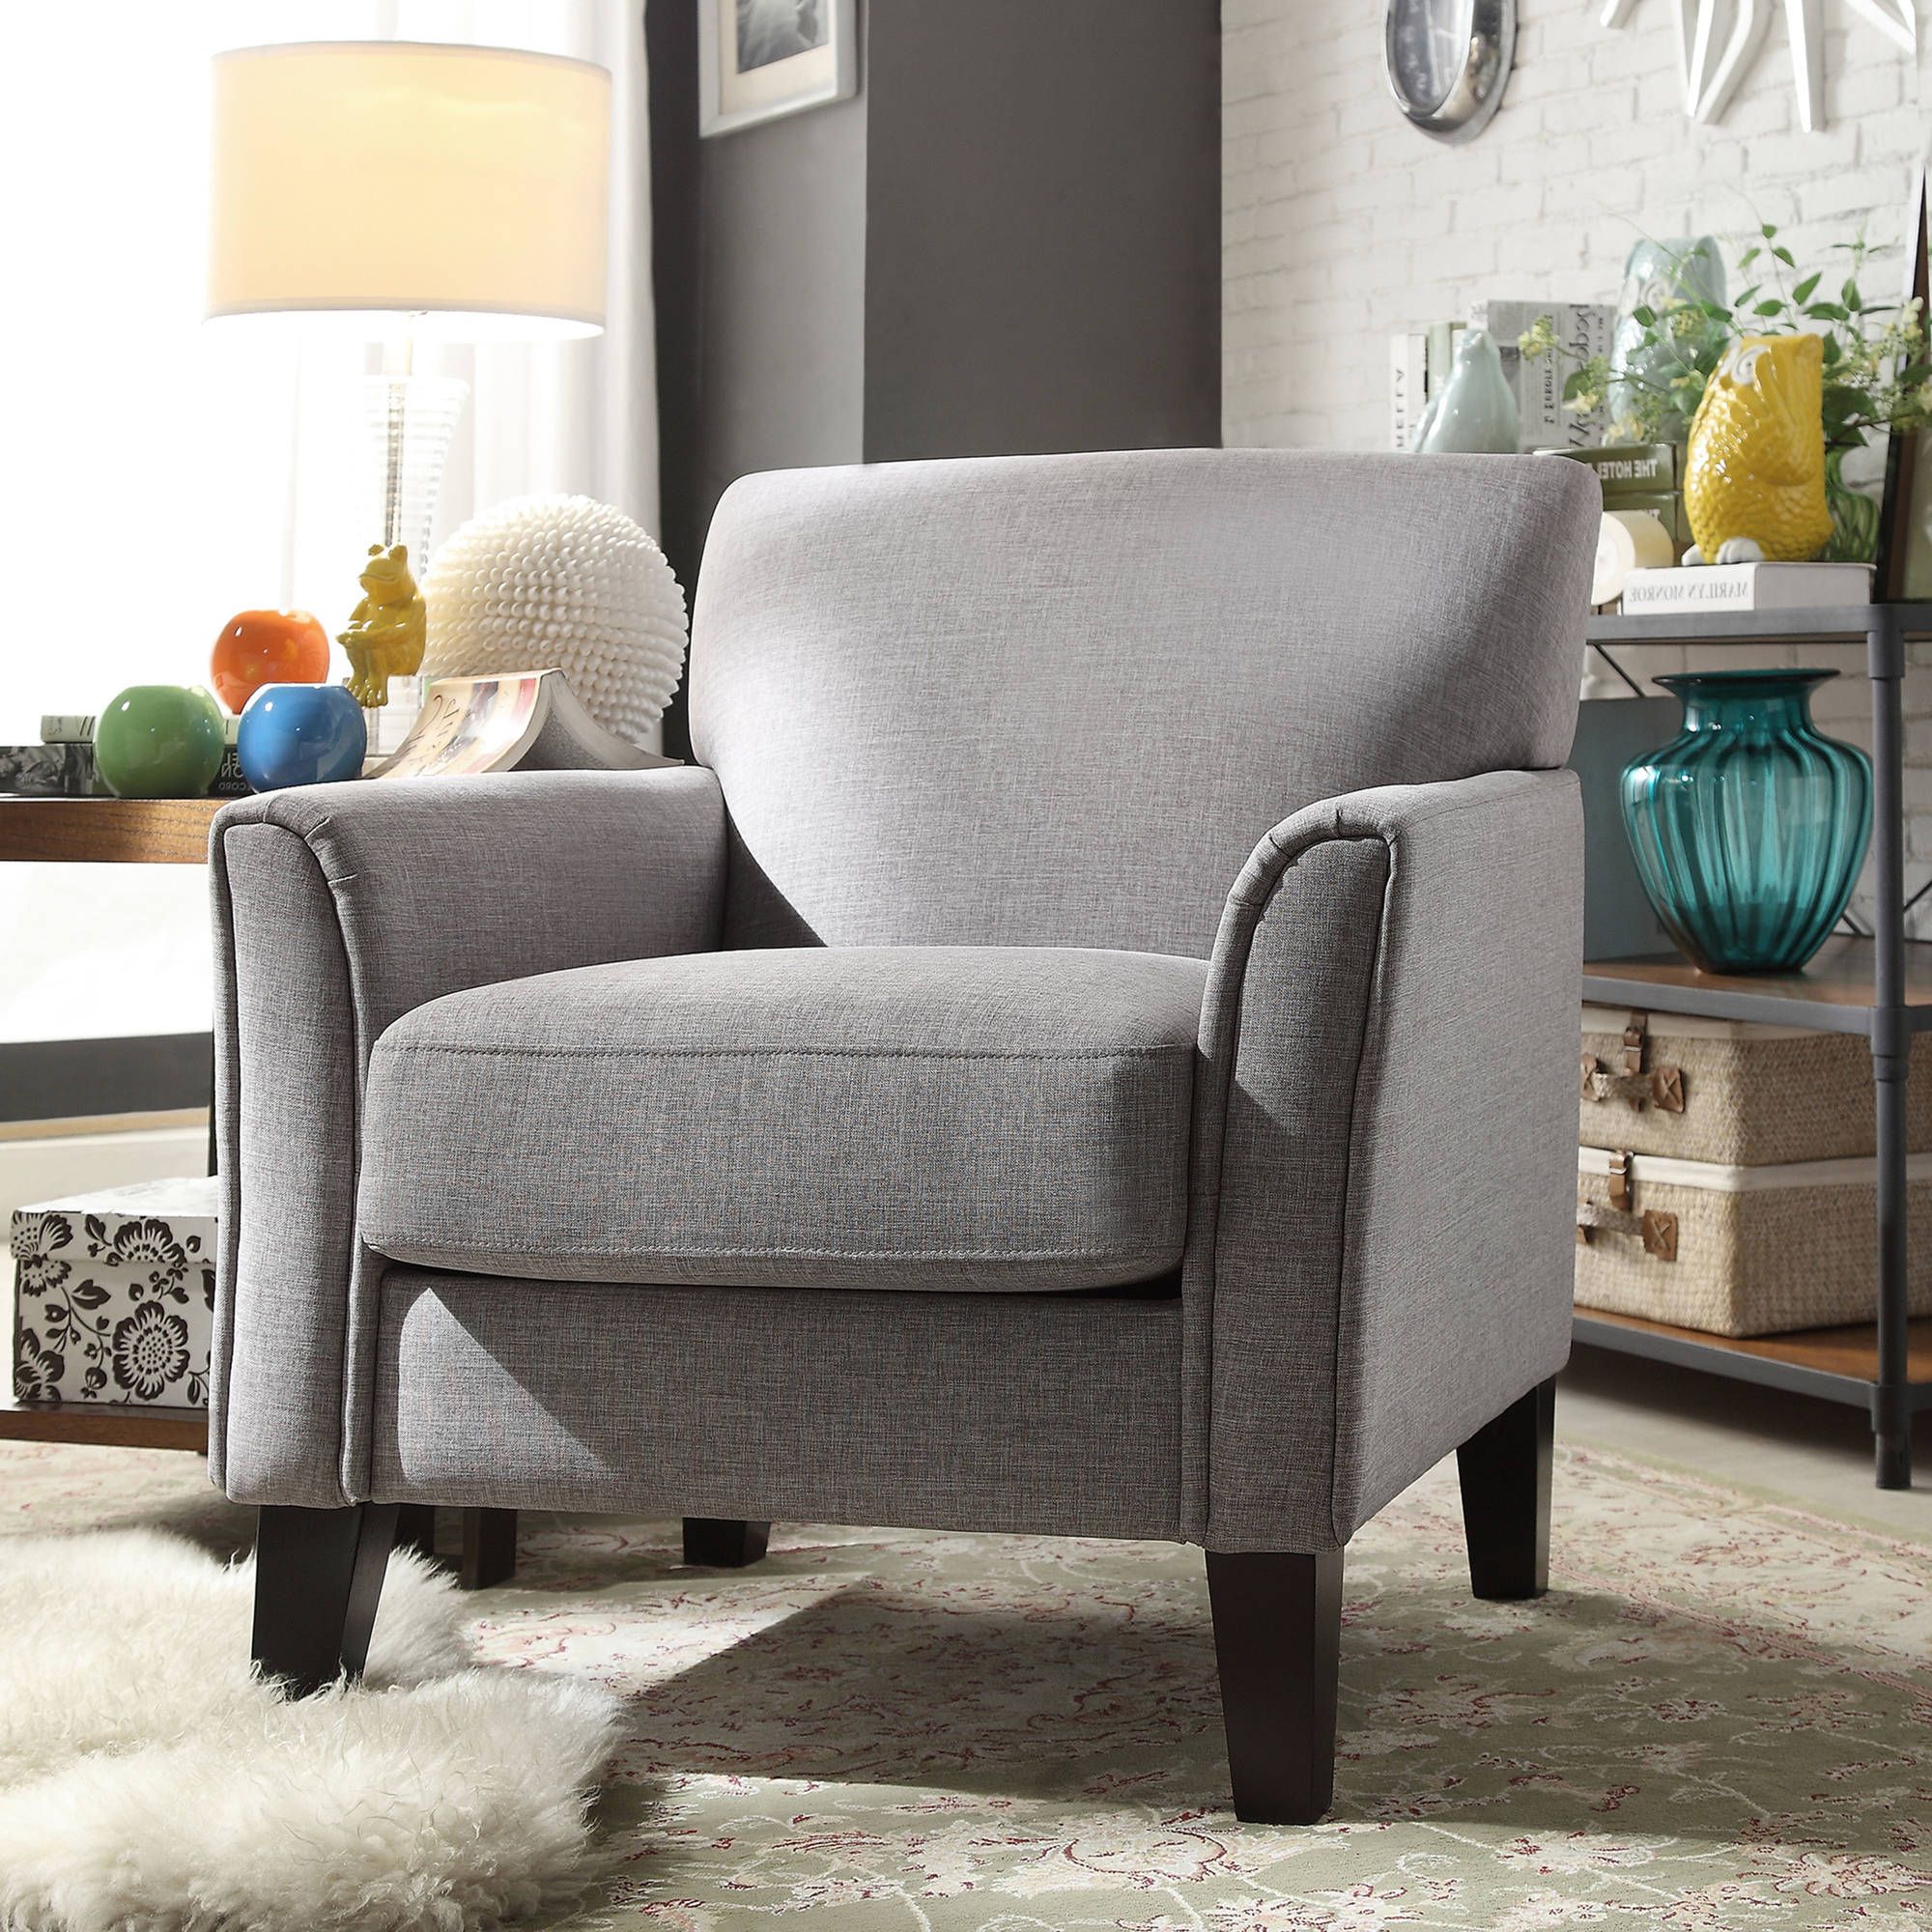 Gray Chenille Fabric Accent Stools With Regard To Newest Weston Home Tribeca Living Room Upholstered Accent Chair, Grey Linen (View 4 of 10)